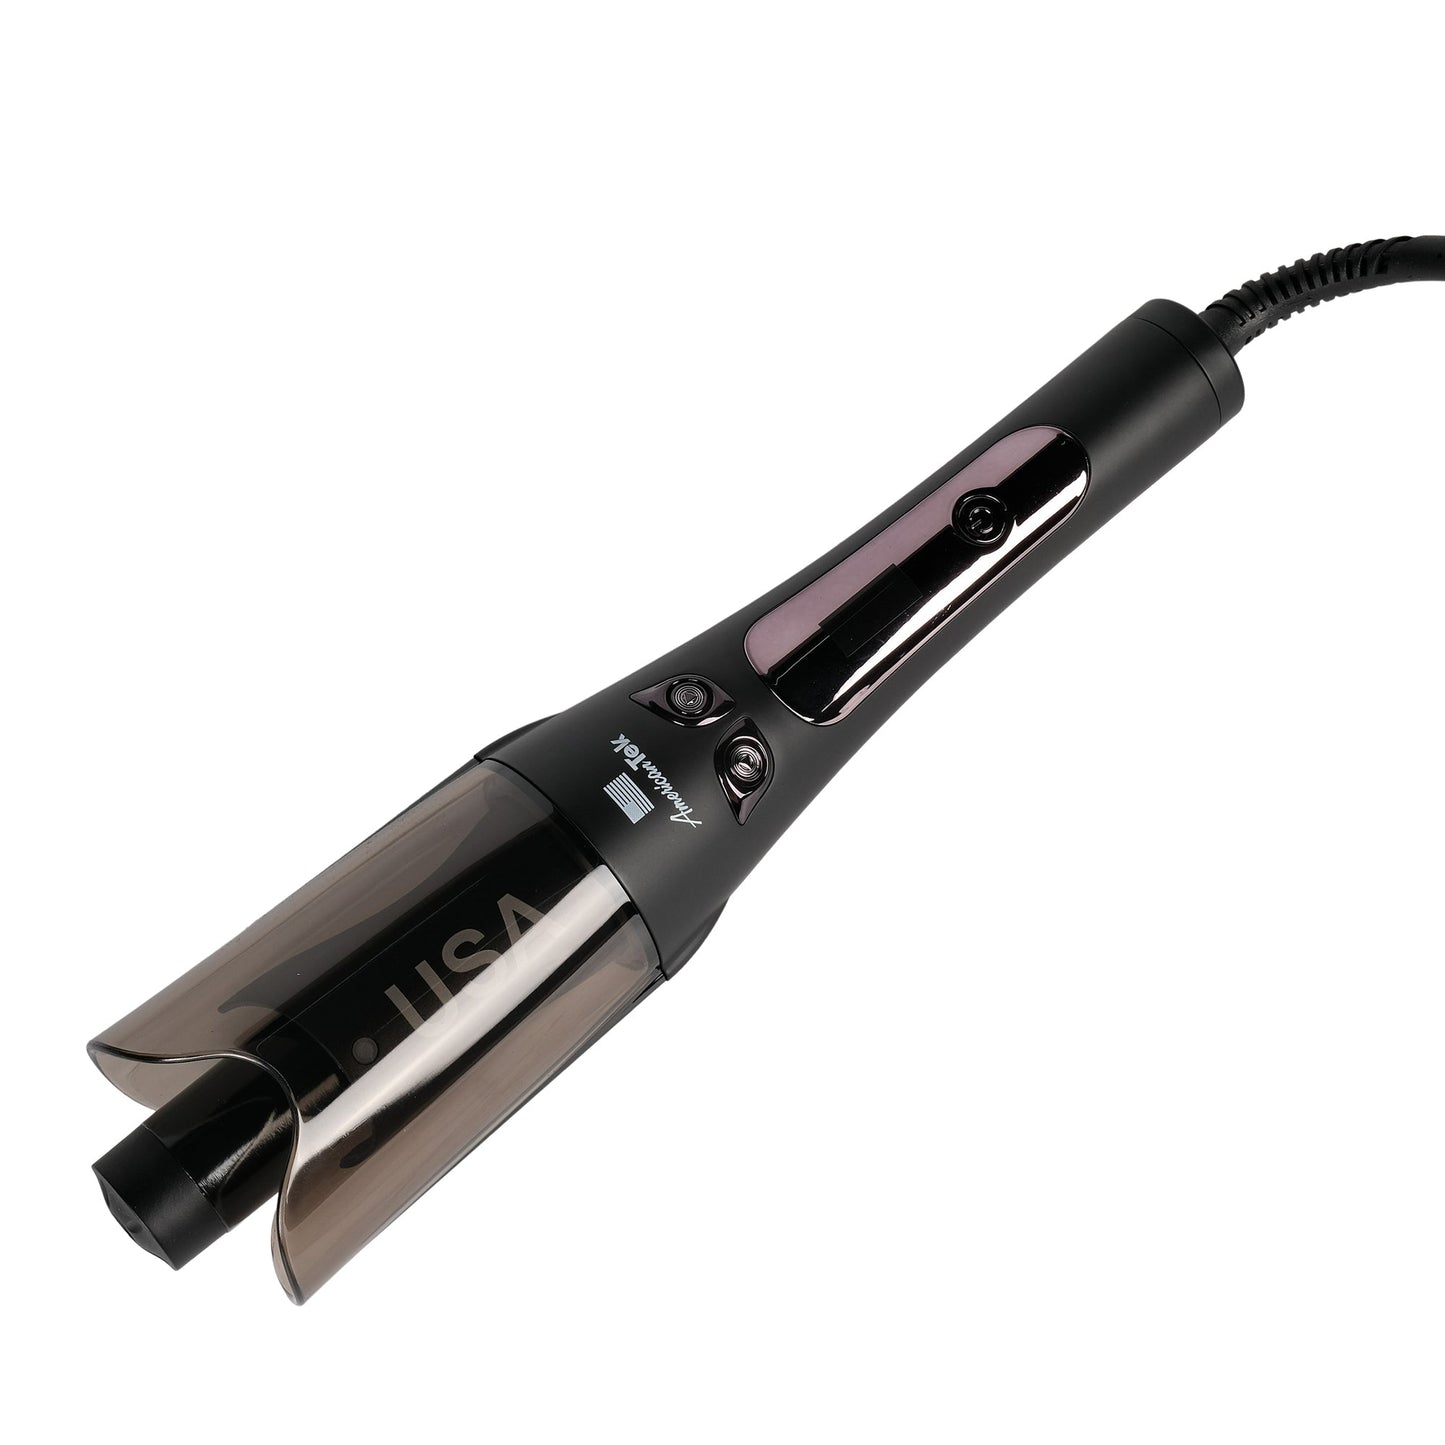 American Tek Automatic Curling Iorn Wand- Auto Curler with 4 Temperatures & 3 Timers & LCD Display, Curling Iron with 1" Large Rotating Barrel, Auto Shut-Off Spin Iron for Hair Styling - Black - Couture Hair Pro